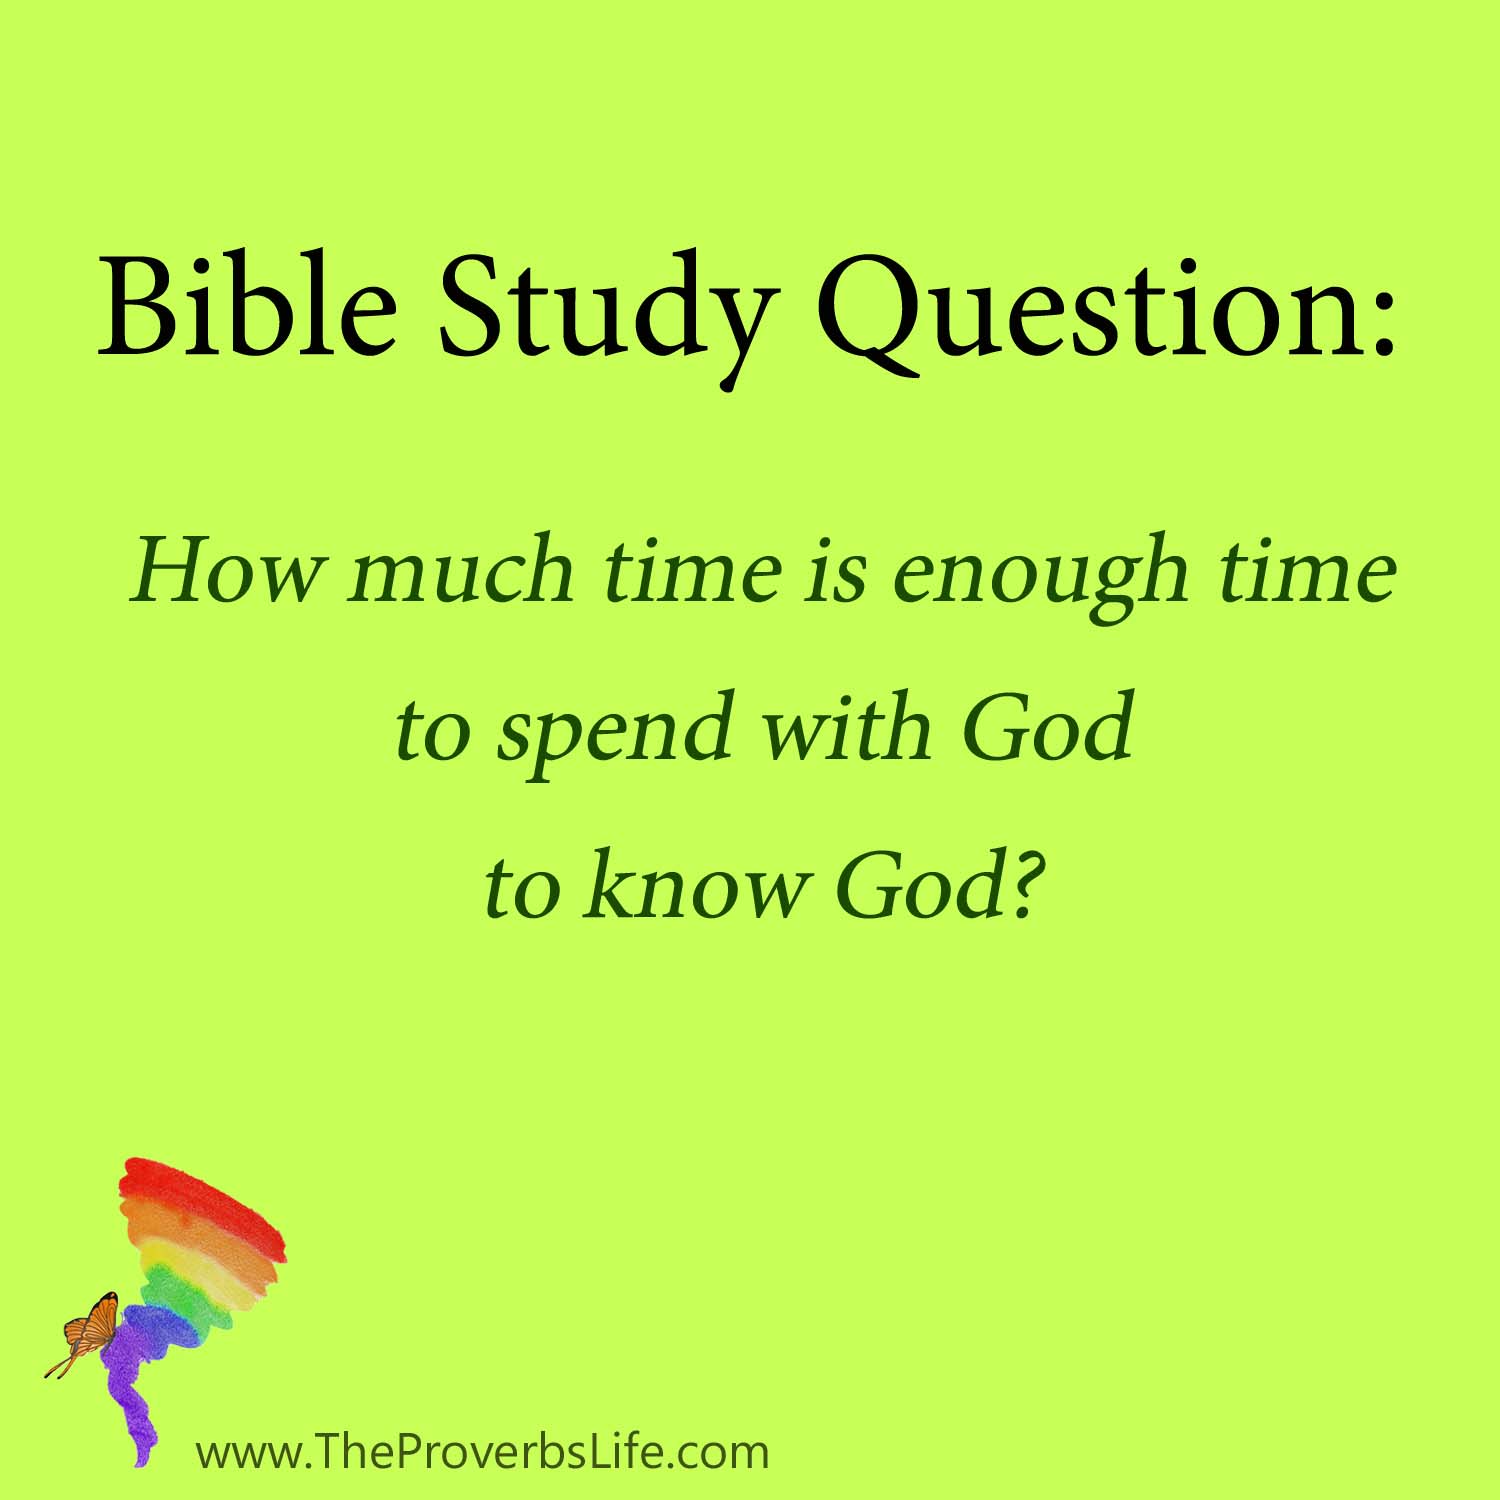 Bible Study Question - time with God